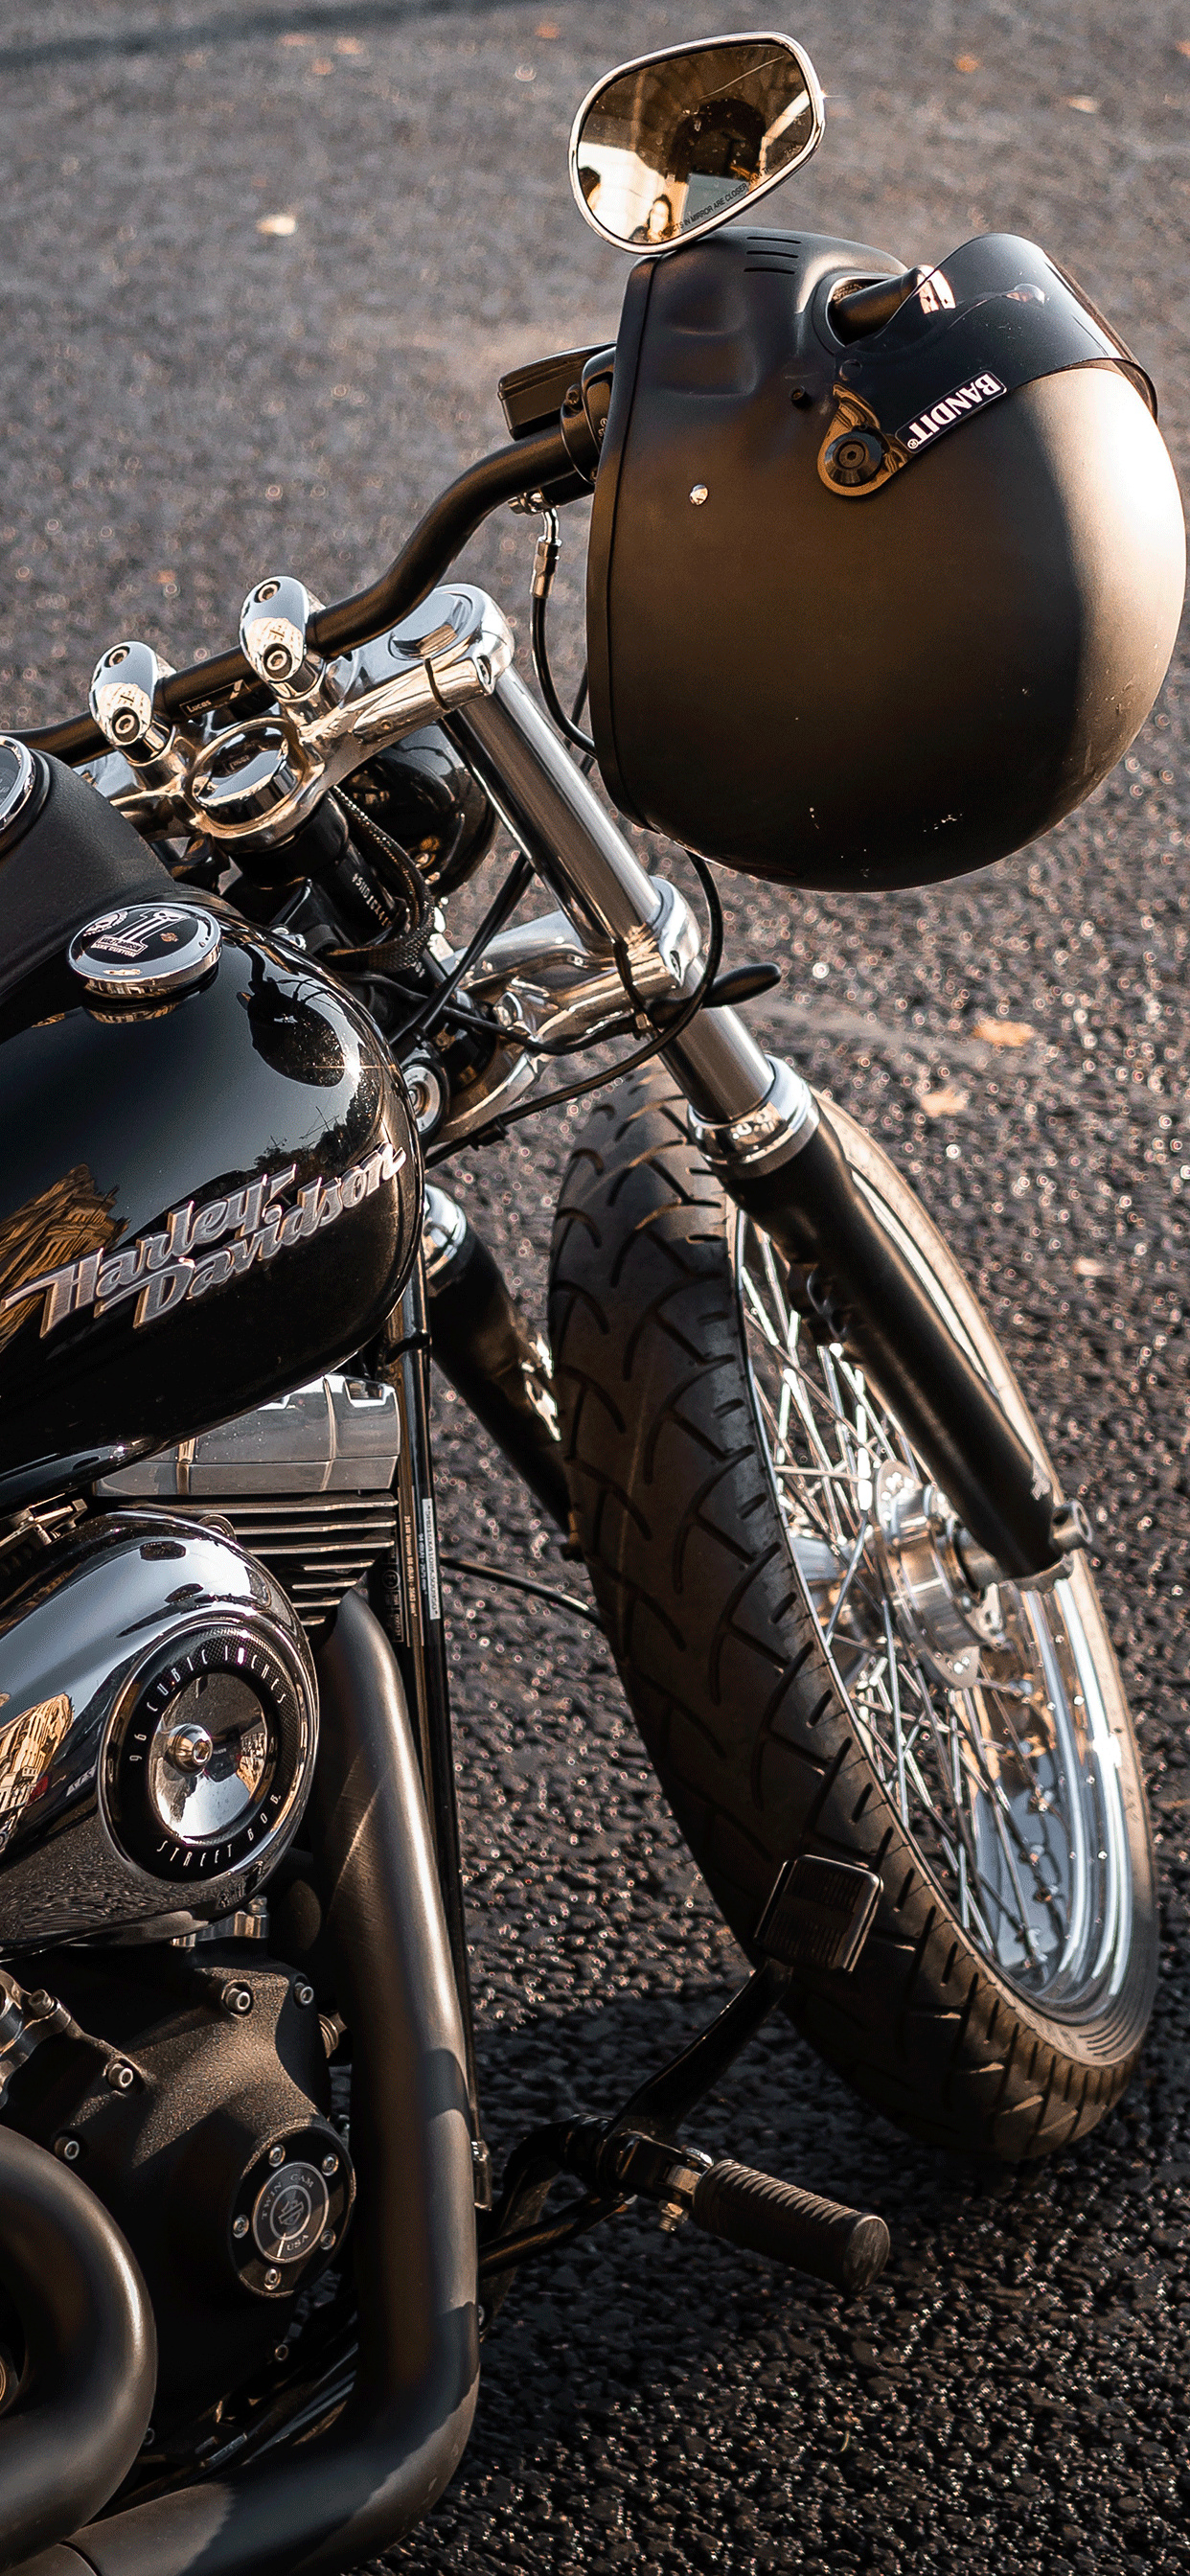 Harley-Davidson Iron 883, HD iPhone wallpapers, Captivating visuals, Motorcycle aesthetic, 1250x2690 HD Phone